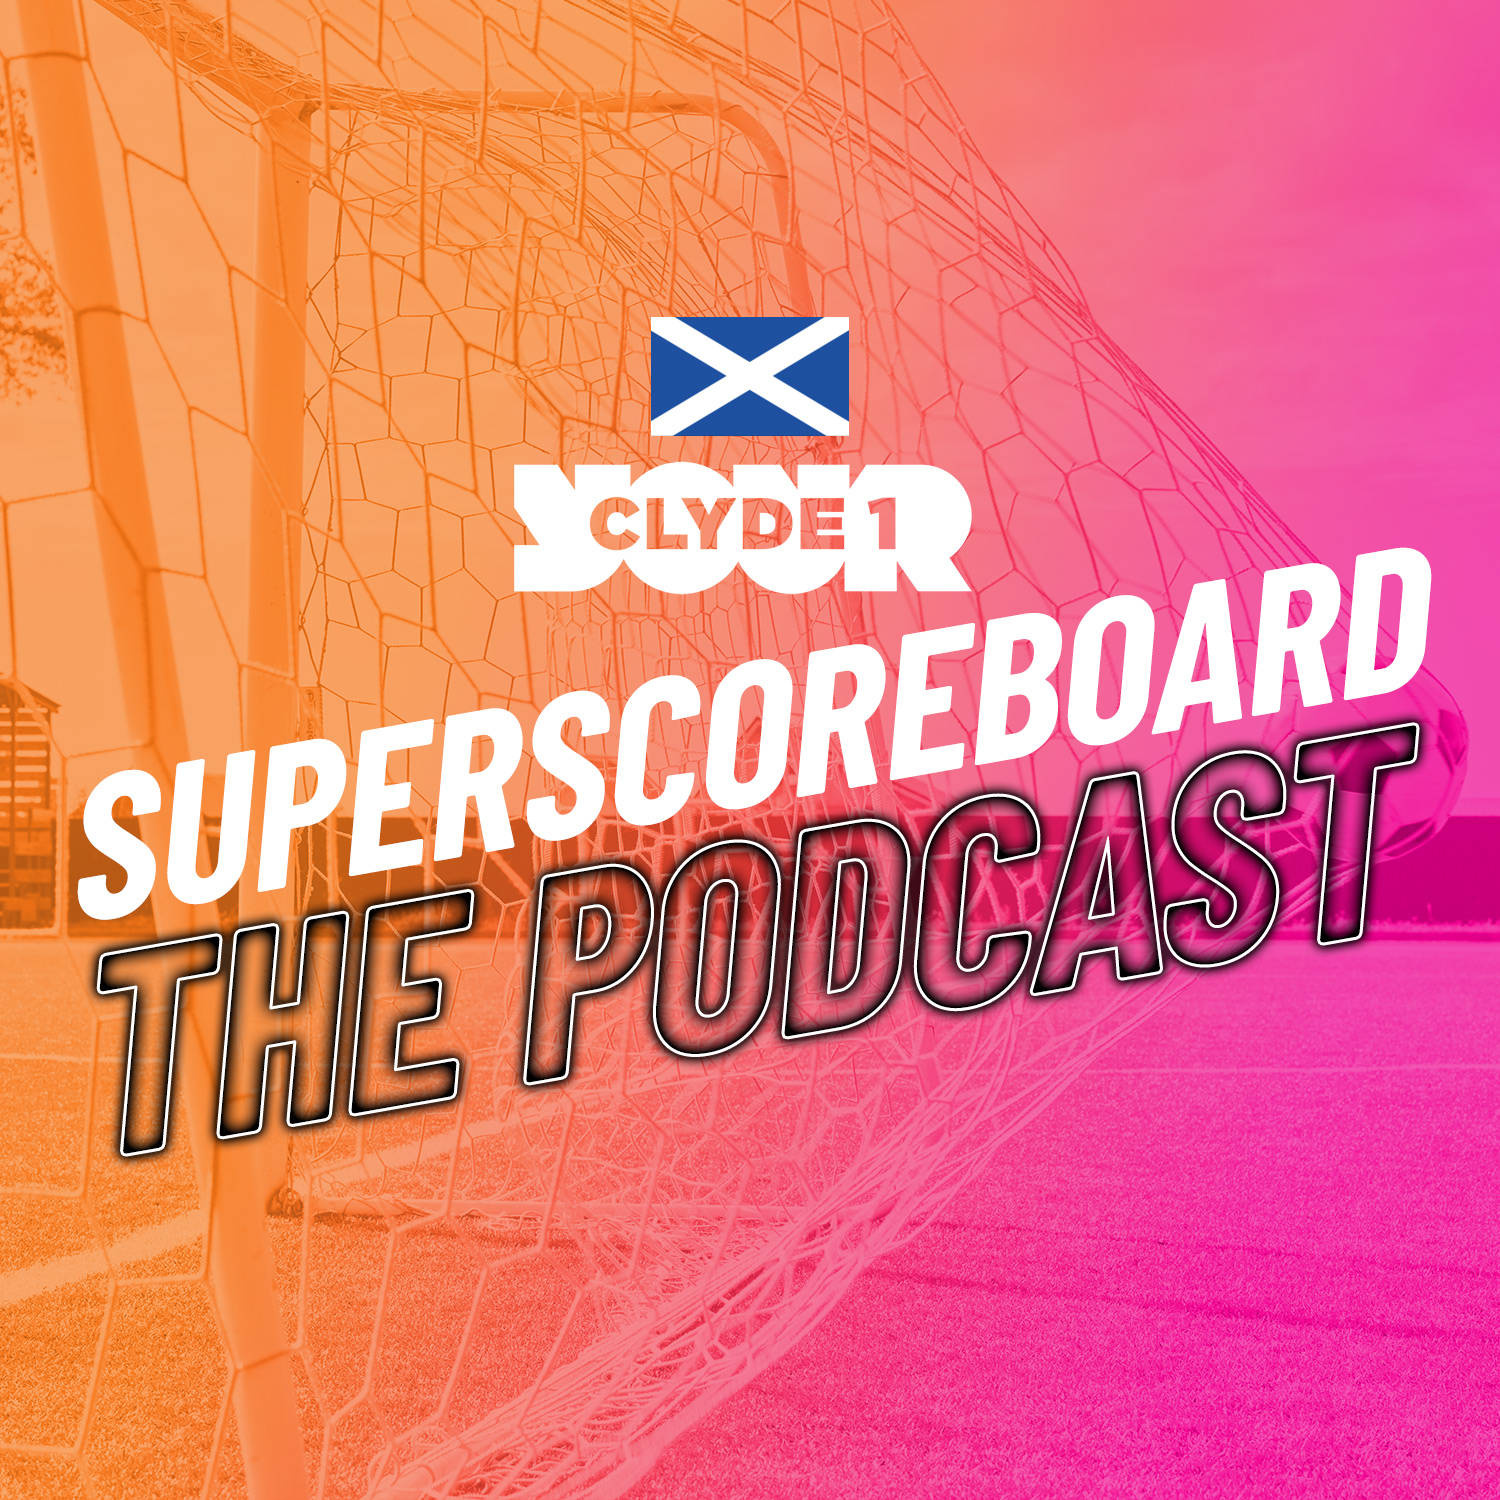 Monday 12th February Clyde 1 Superscoreboard